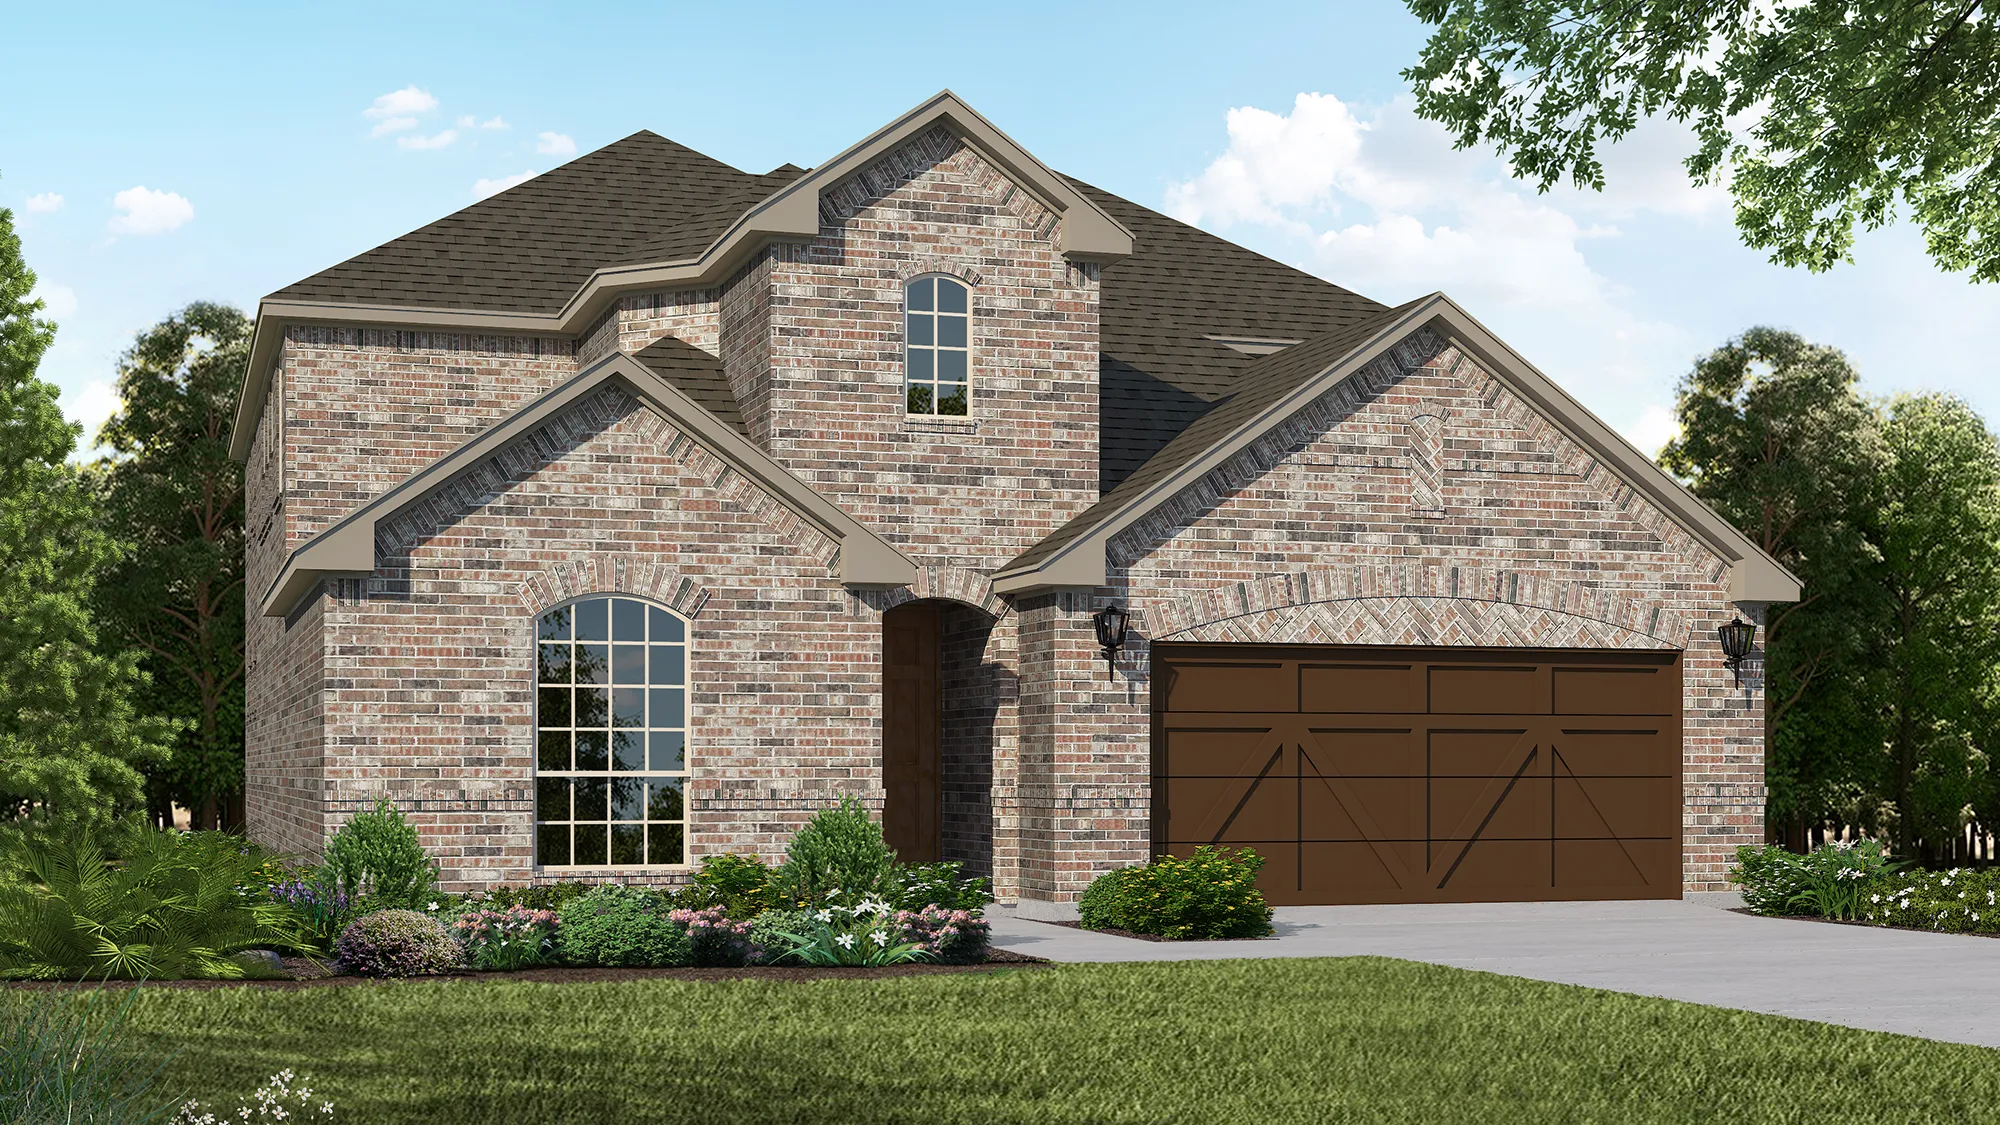 Plan 1527 Elevation A by American Legend Homes